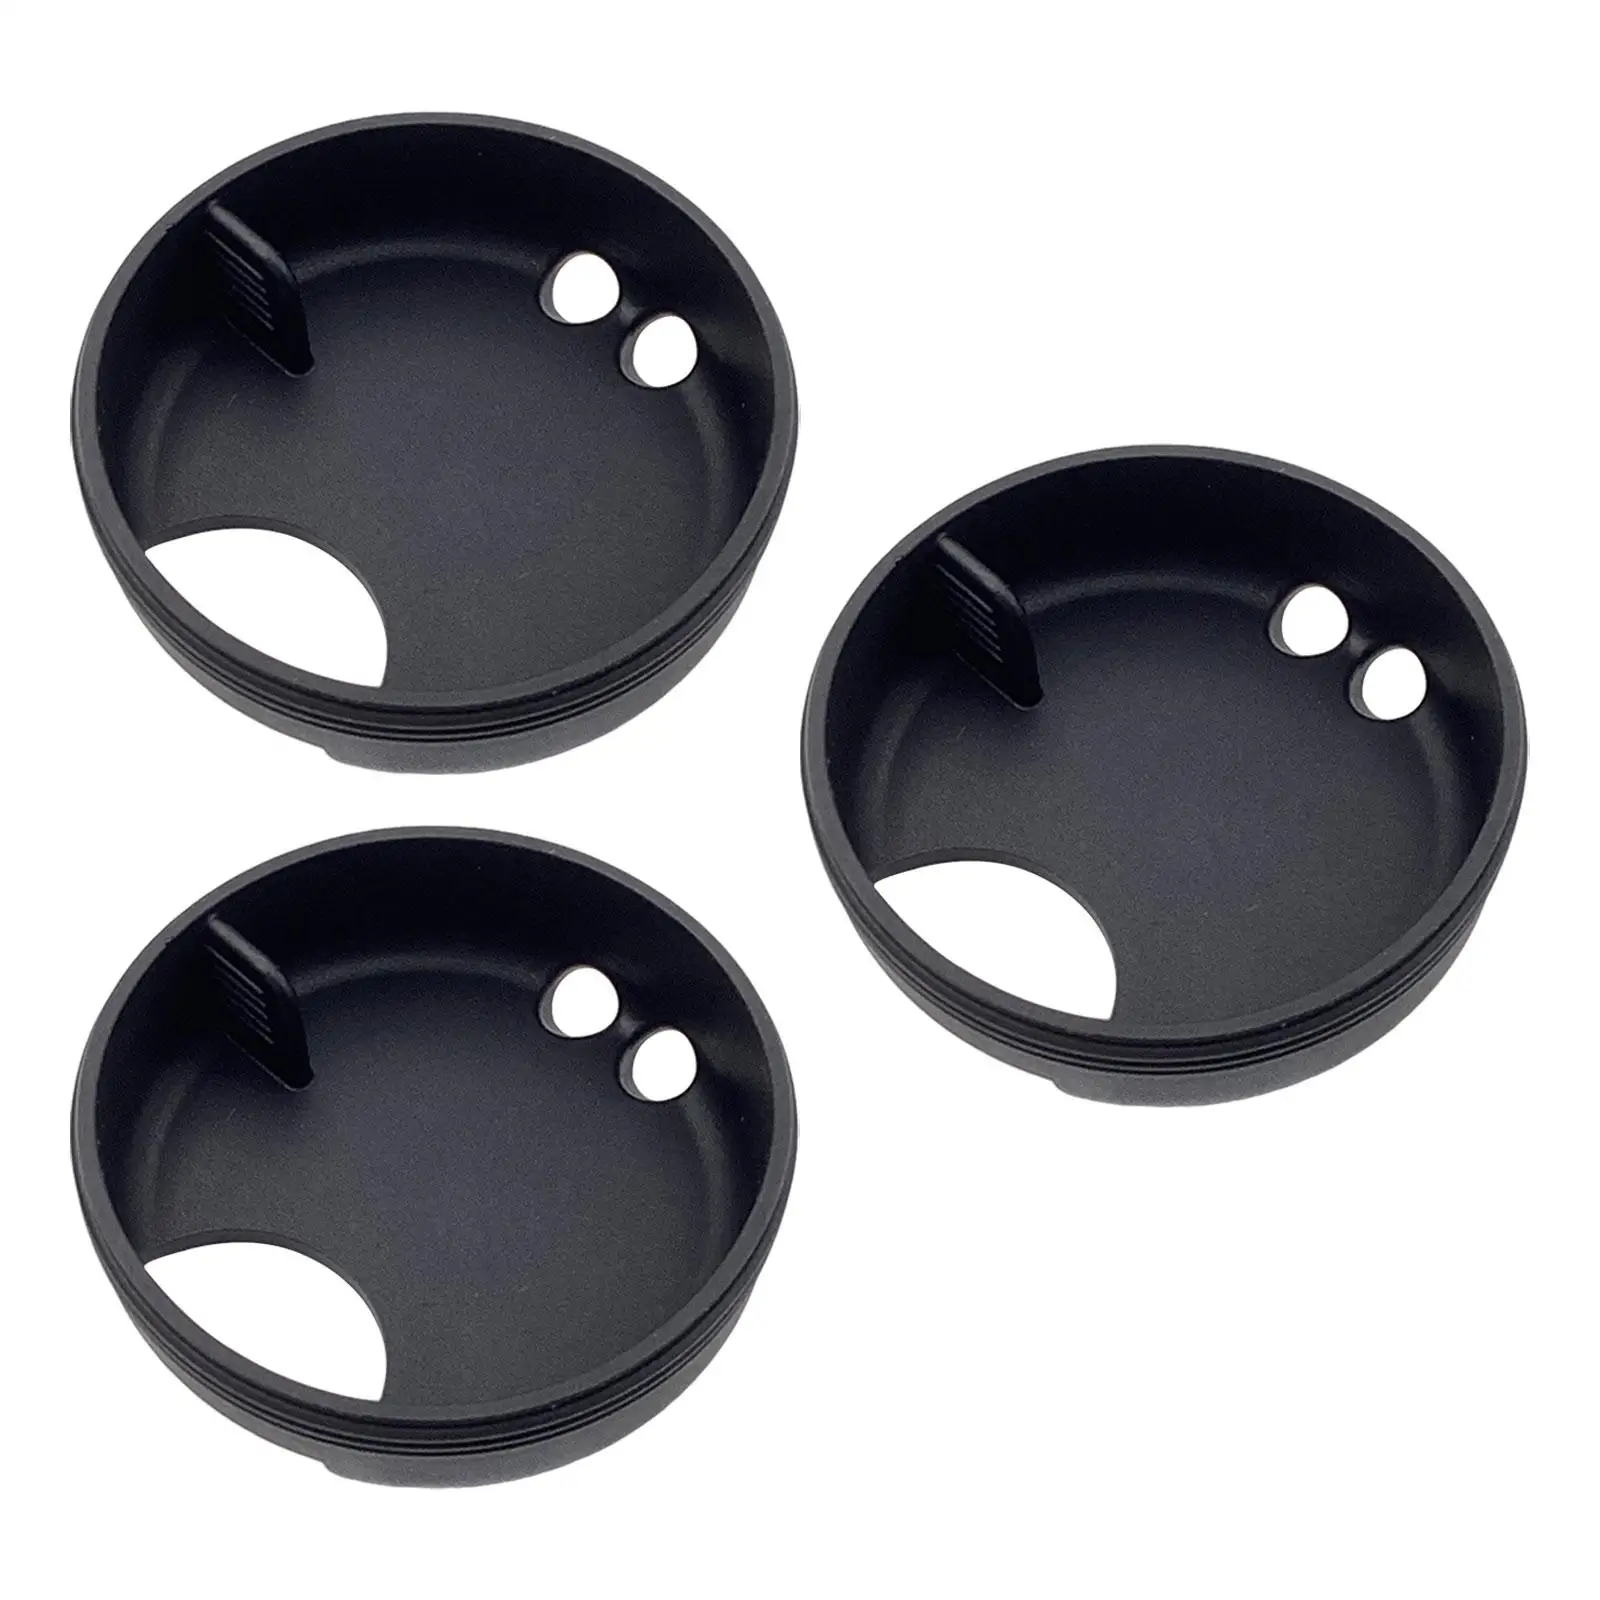 3x Silicone Mouth Splash Guard Replace Spare Parts 53mm Lightweight Water Bottles Accessory Duable Replacement Cap Drinks Cap